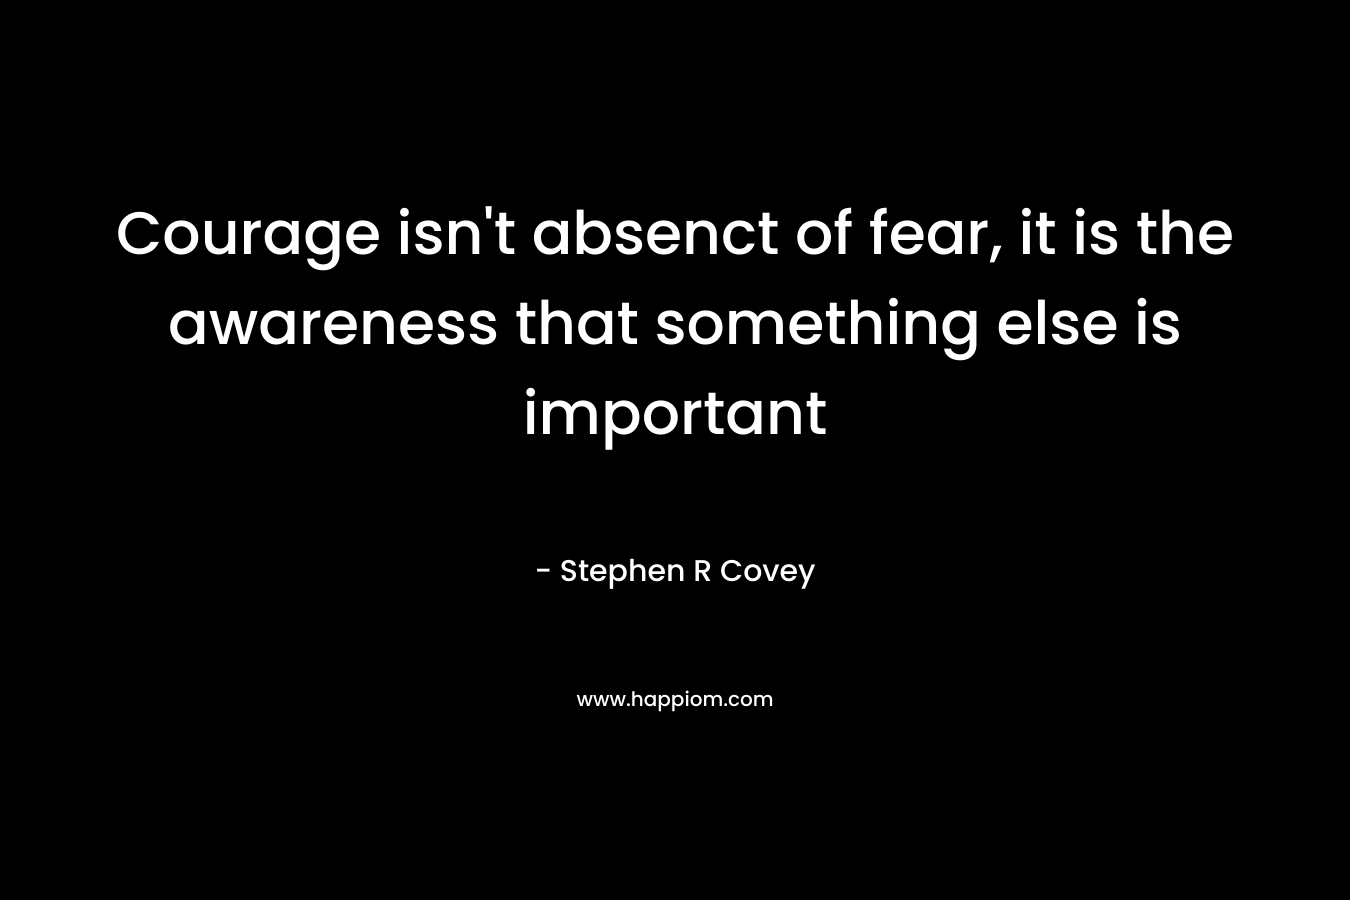 Courage isn’t absenct of fear, it is the awareness that something else is important – Stephen R Covey